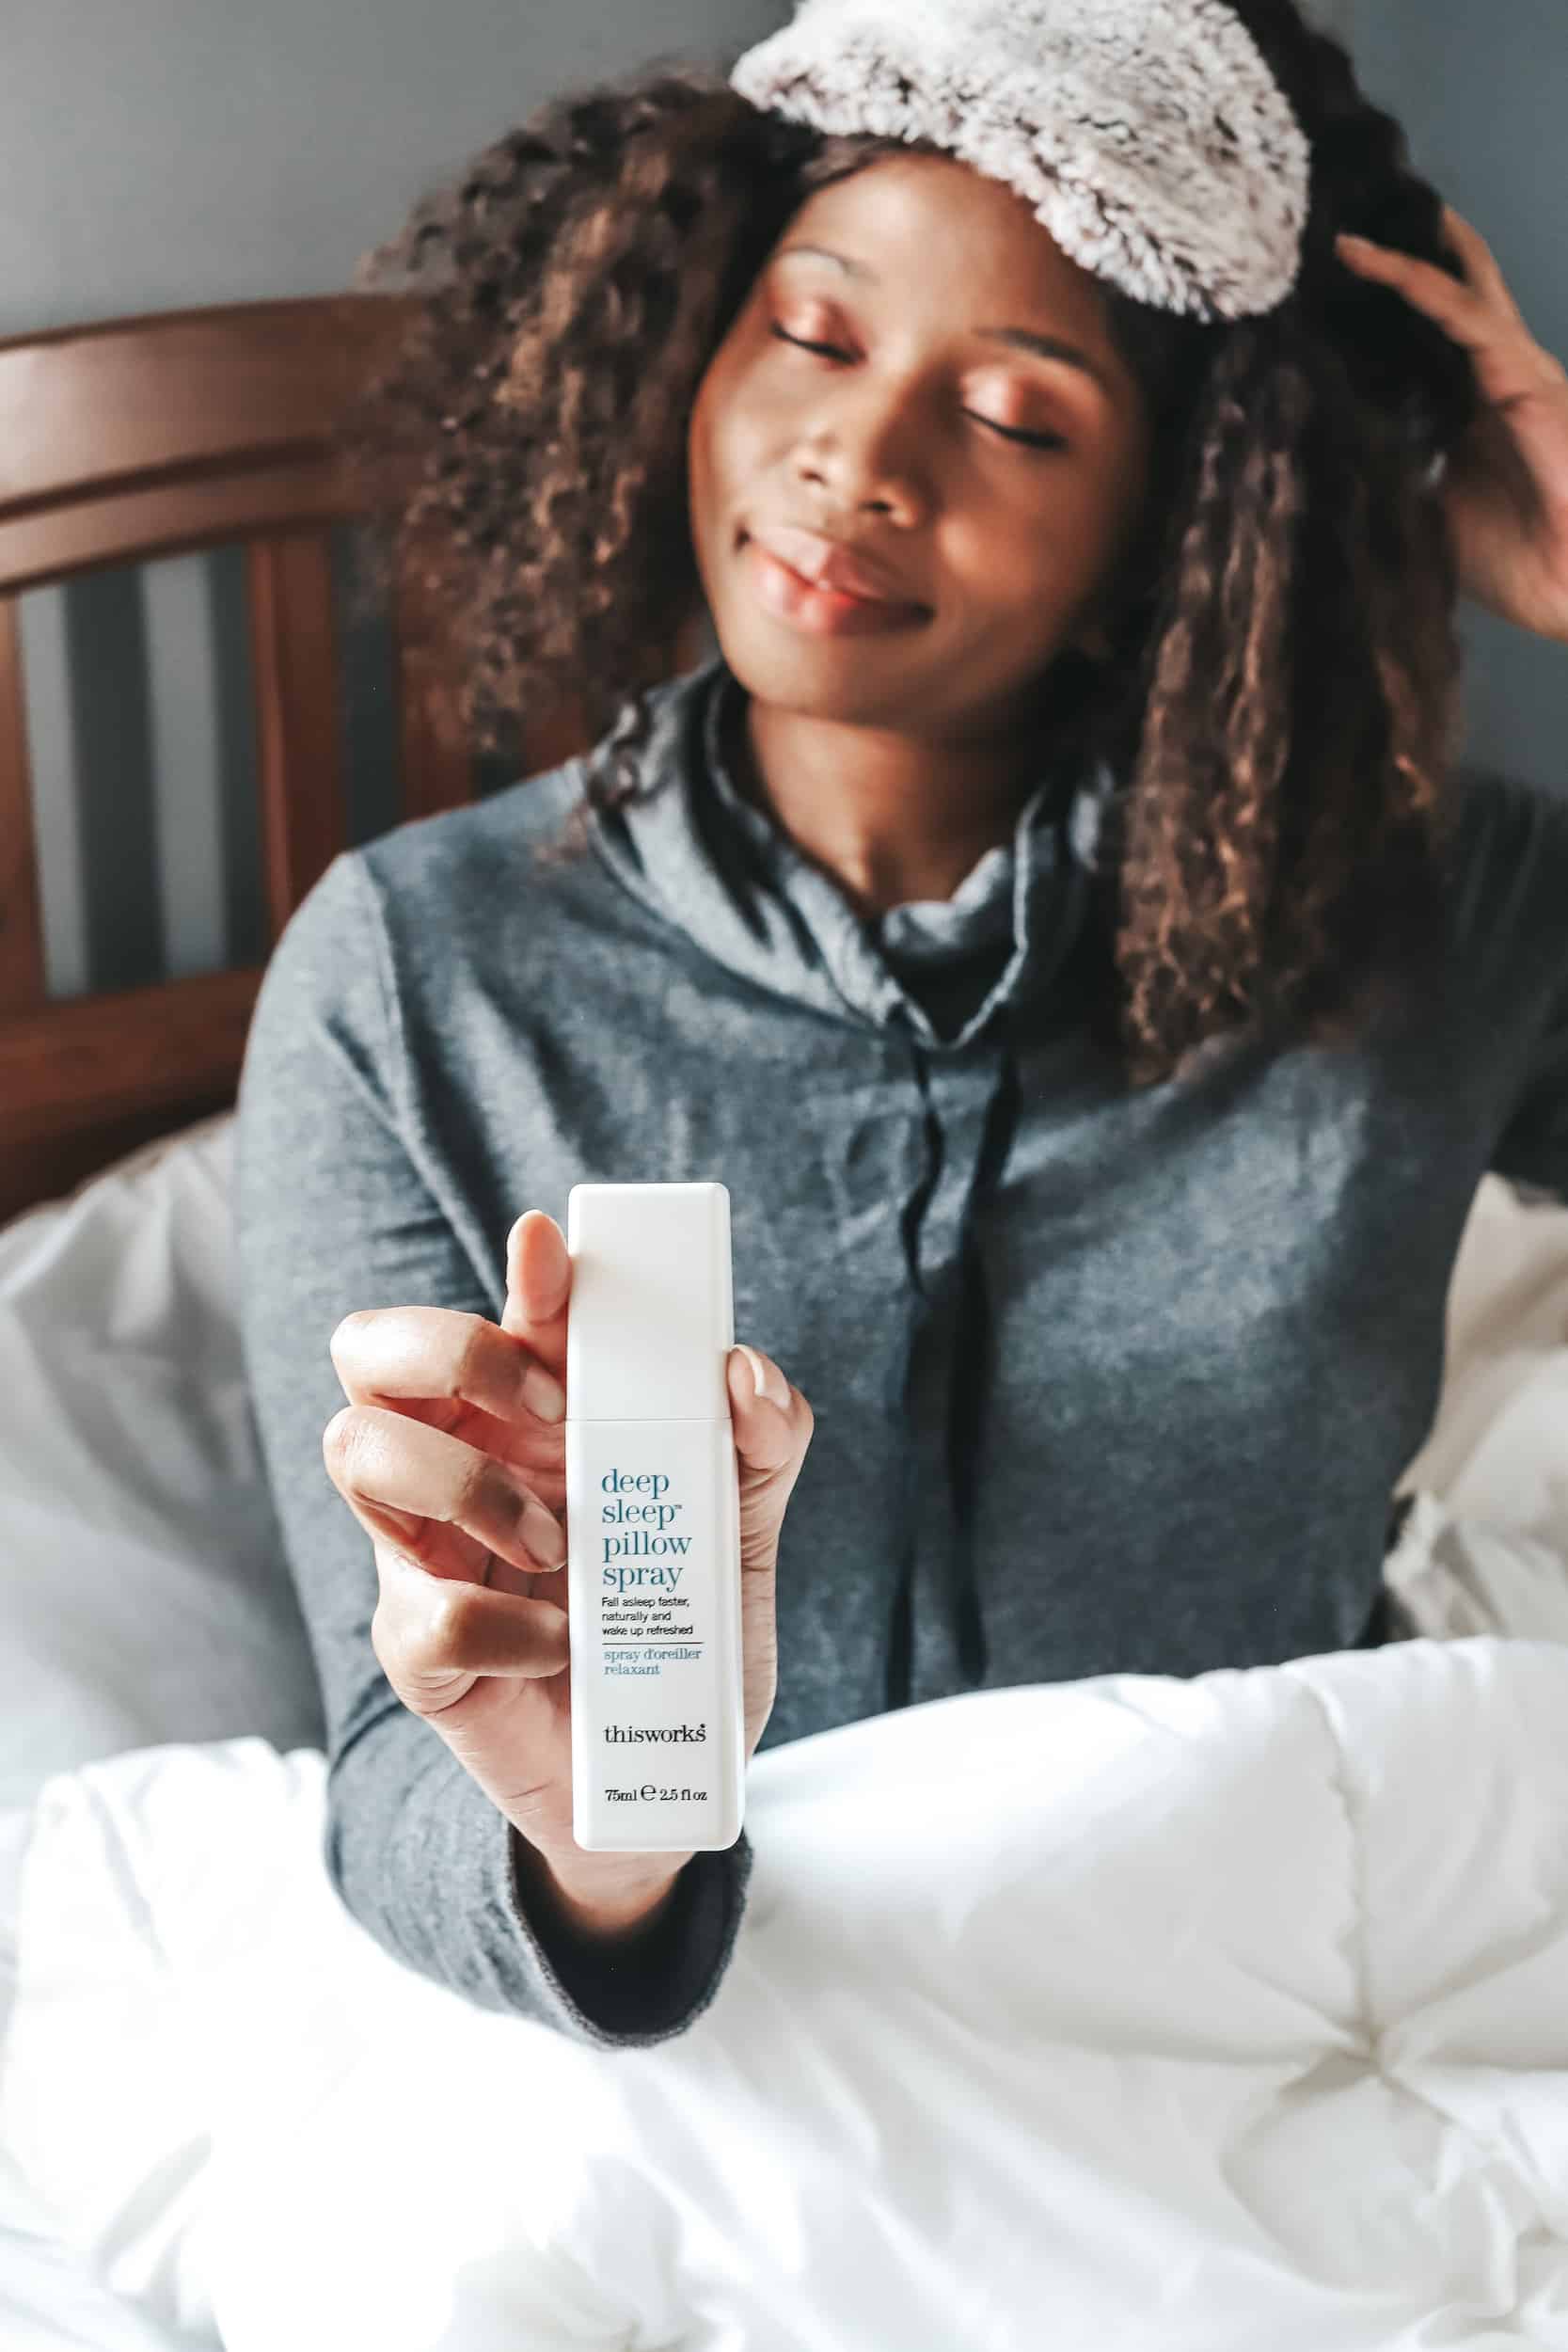 How I Enhanced My Sleep With This Works + Nighttime Routine